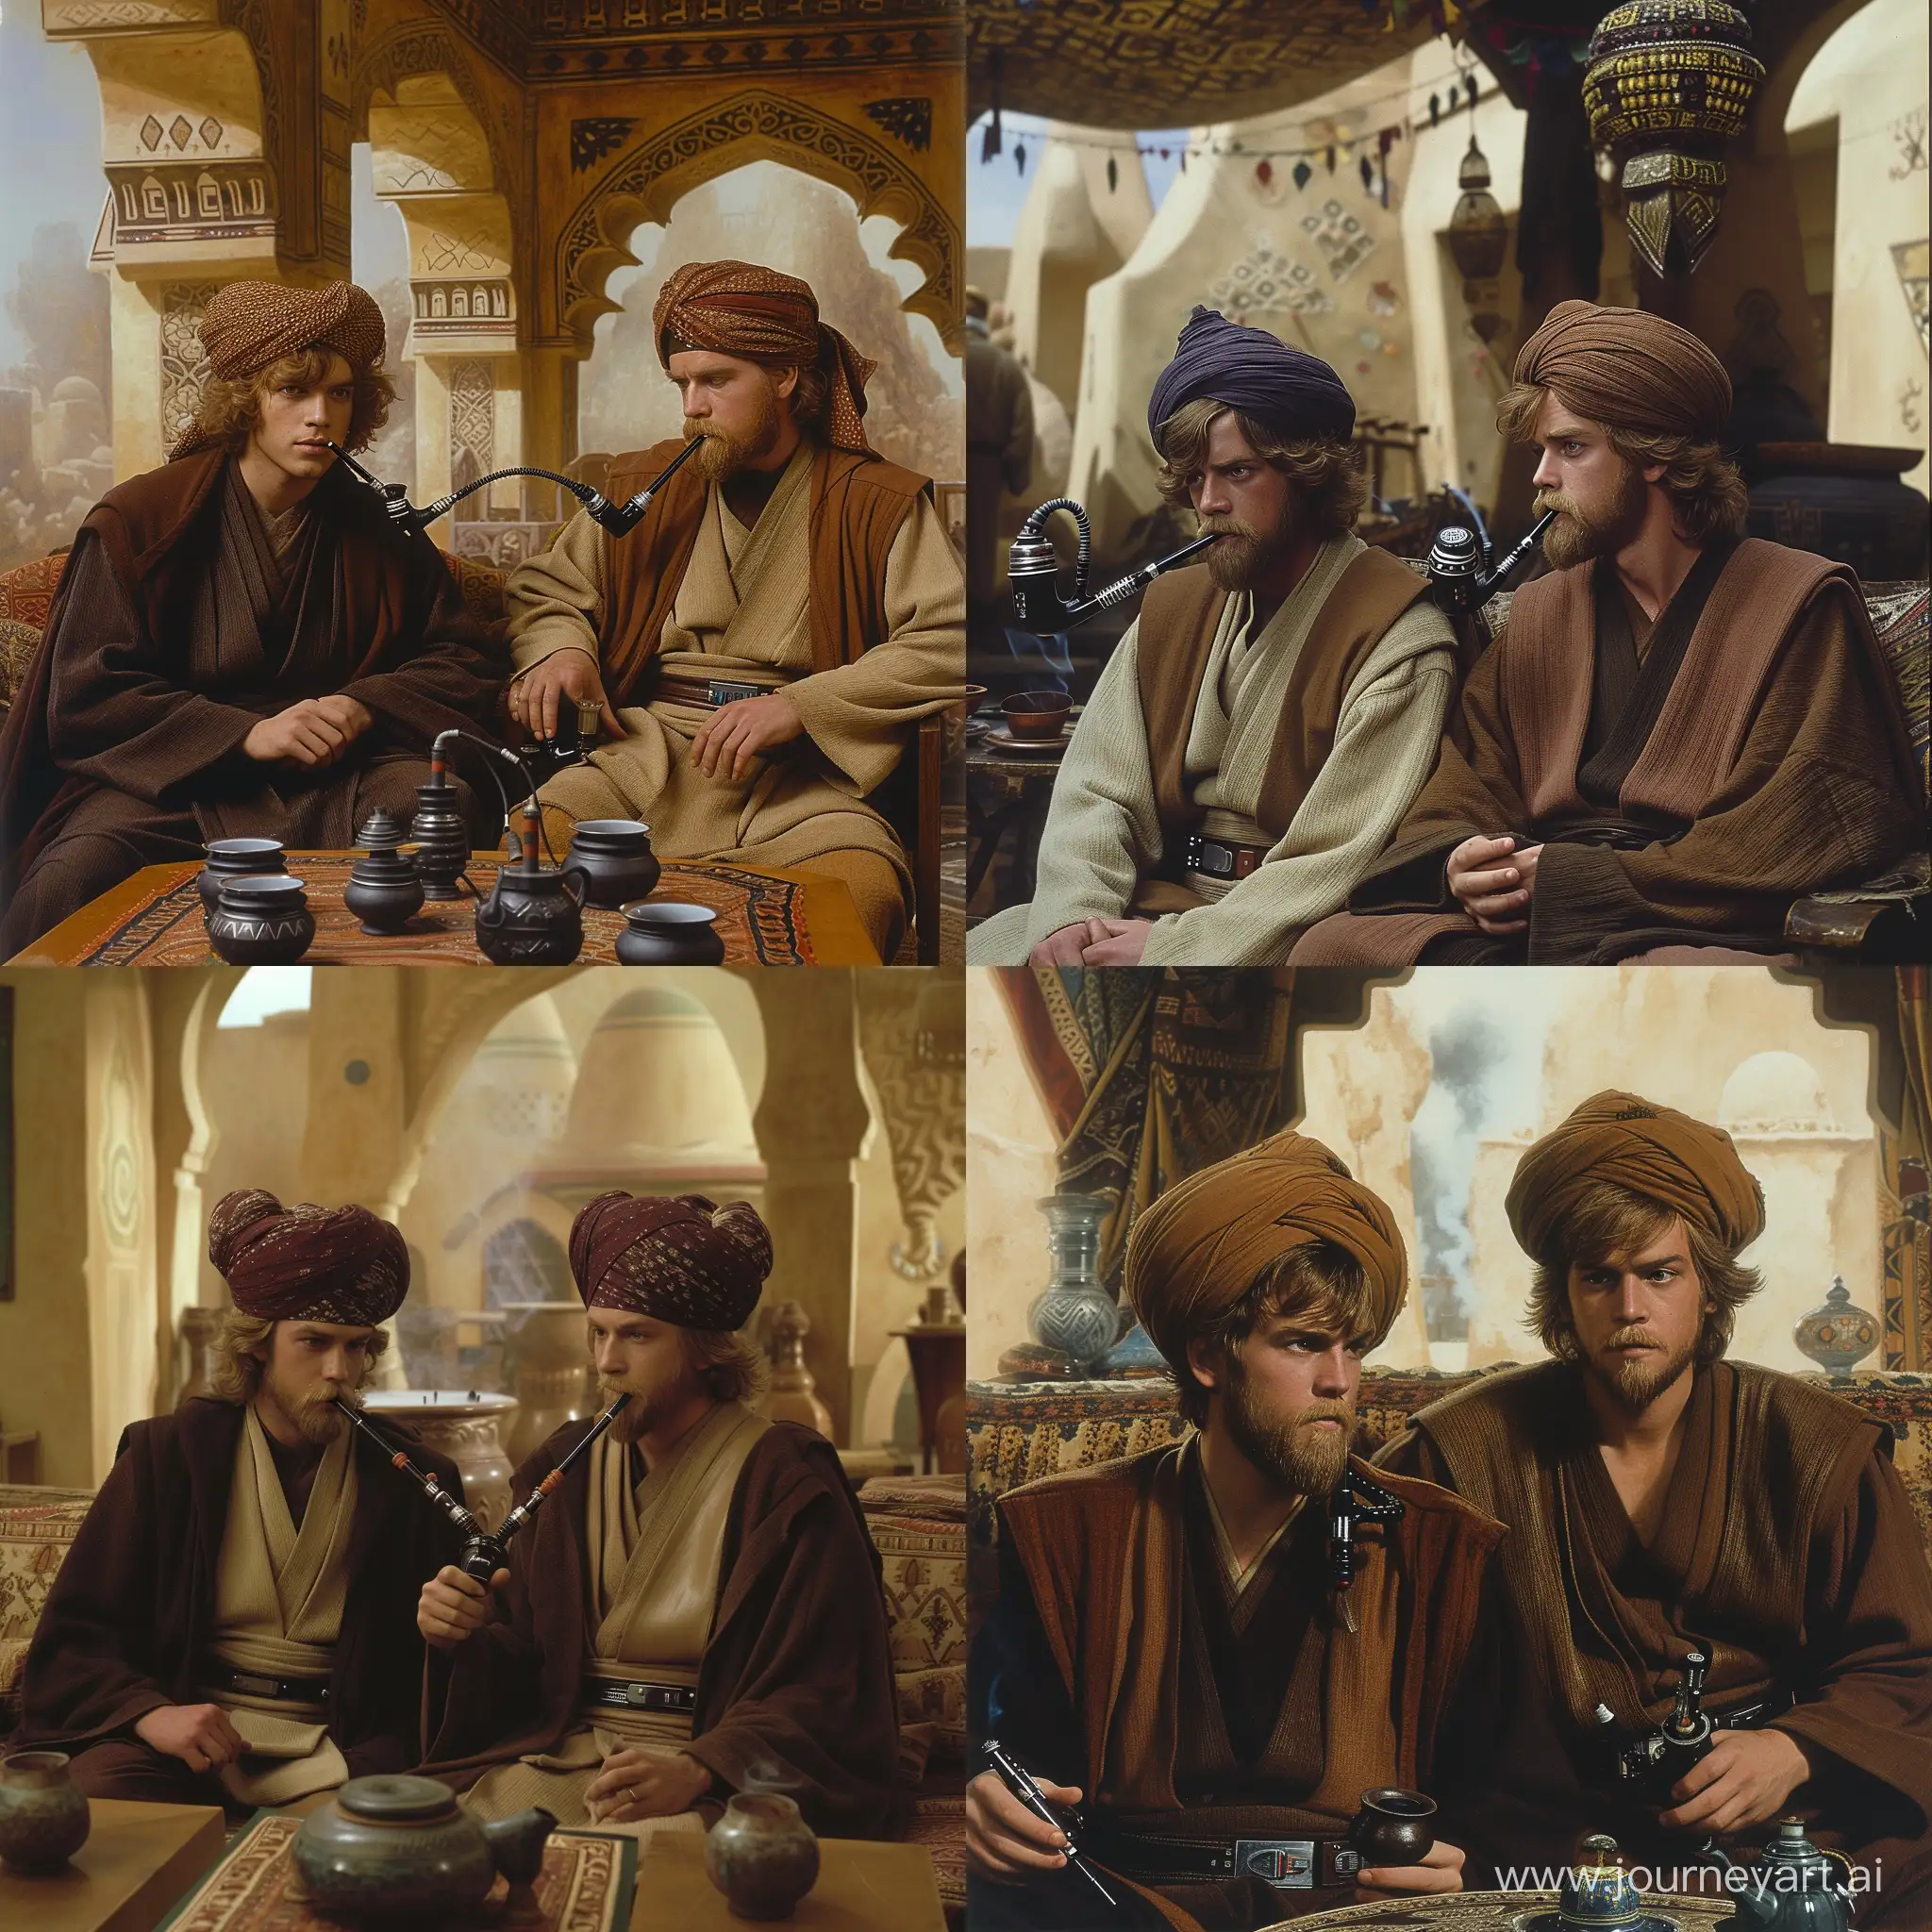 Anakin Skywalker and Obi wan Kenobi from Star Wars are sitting in a teahouse, turbans on their heads, hookah pipes in their mouths